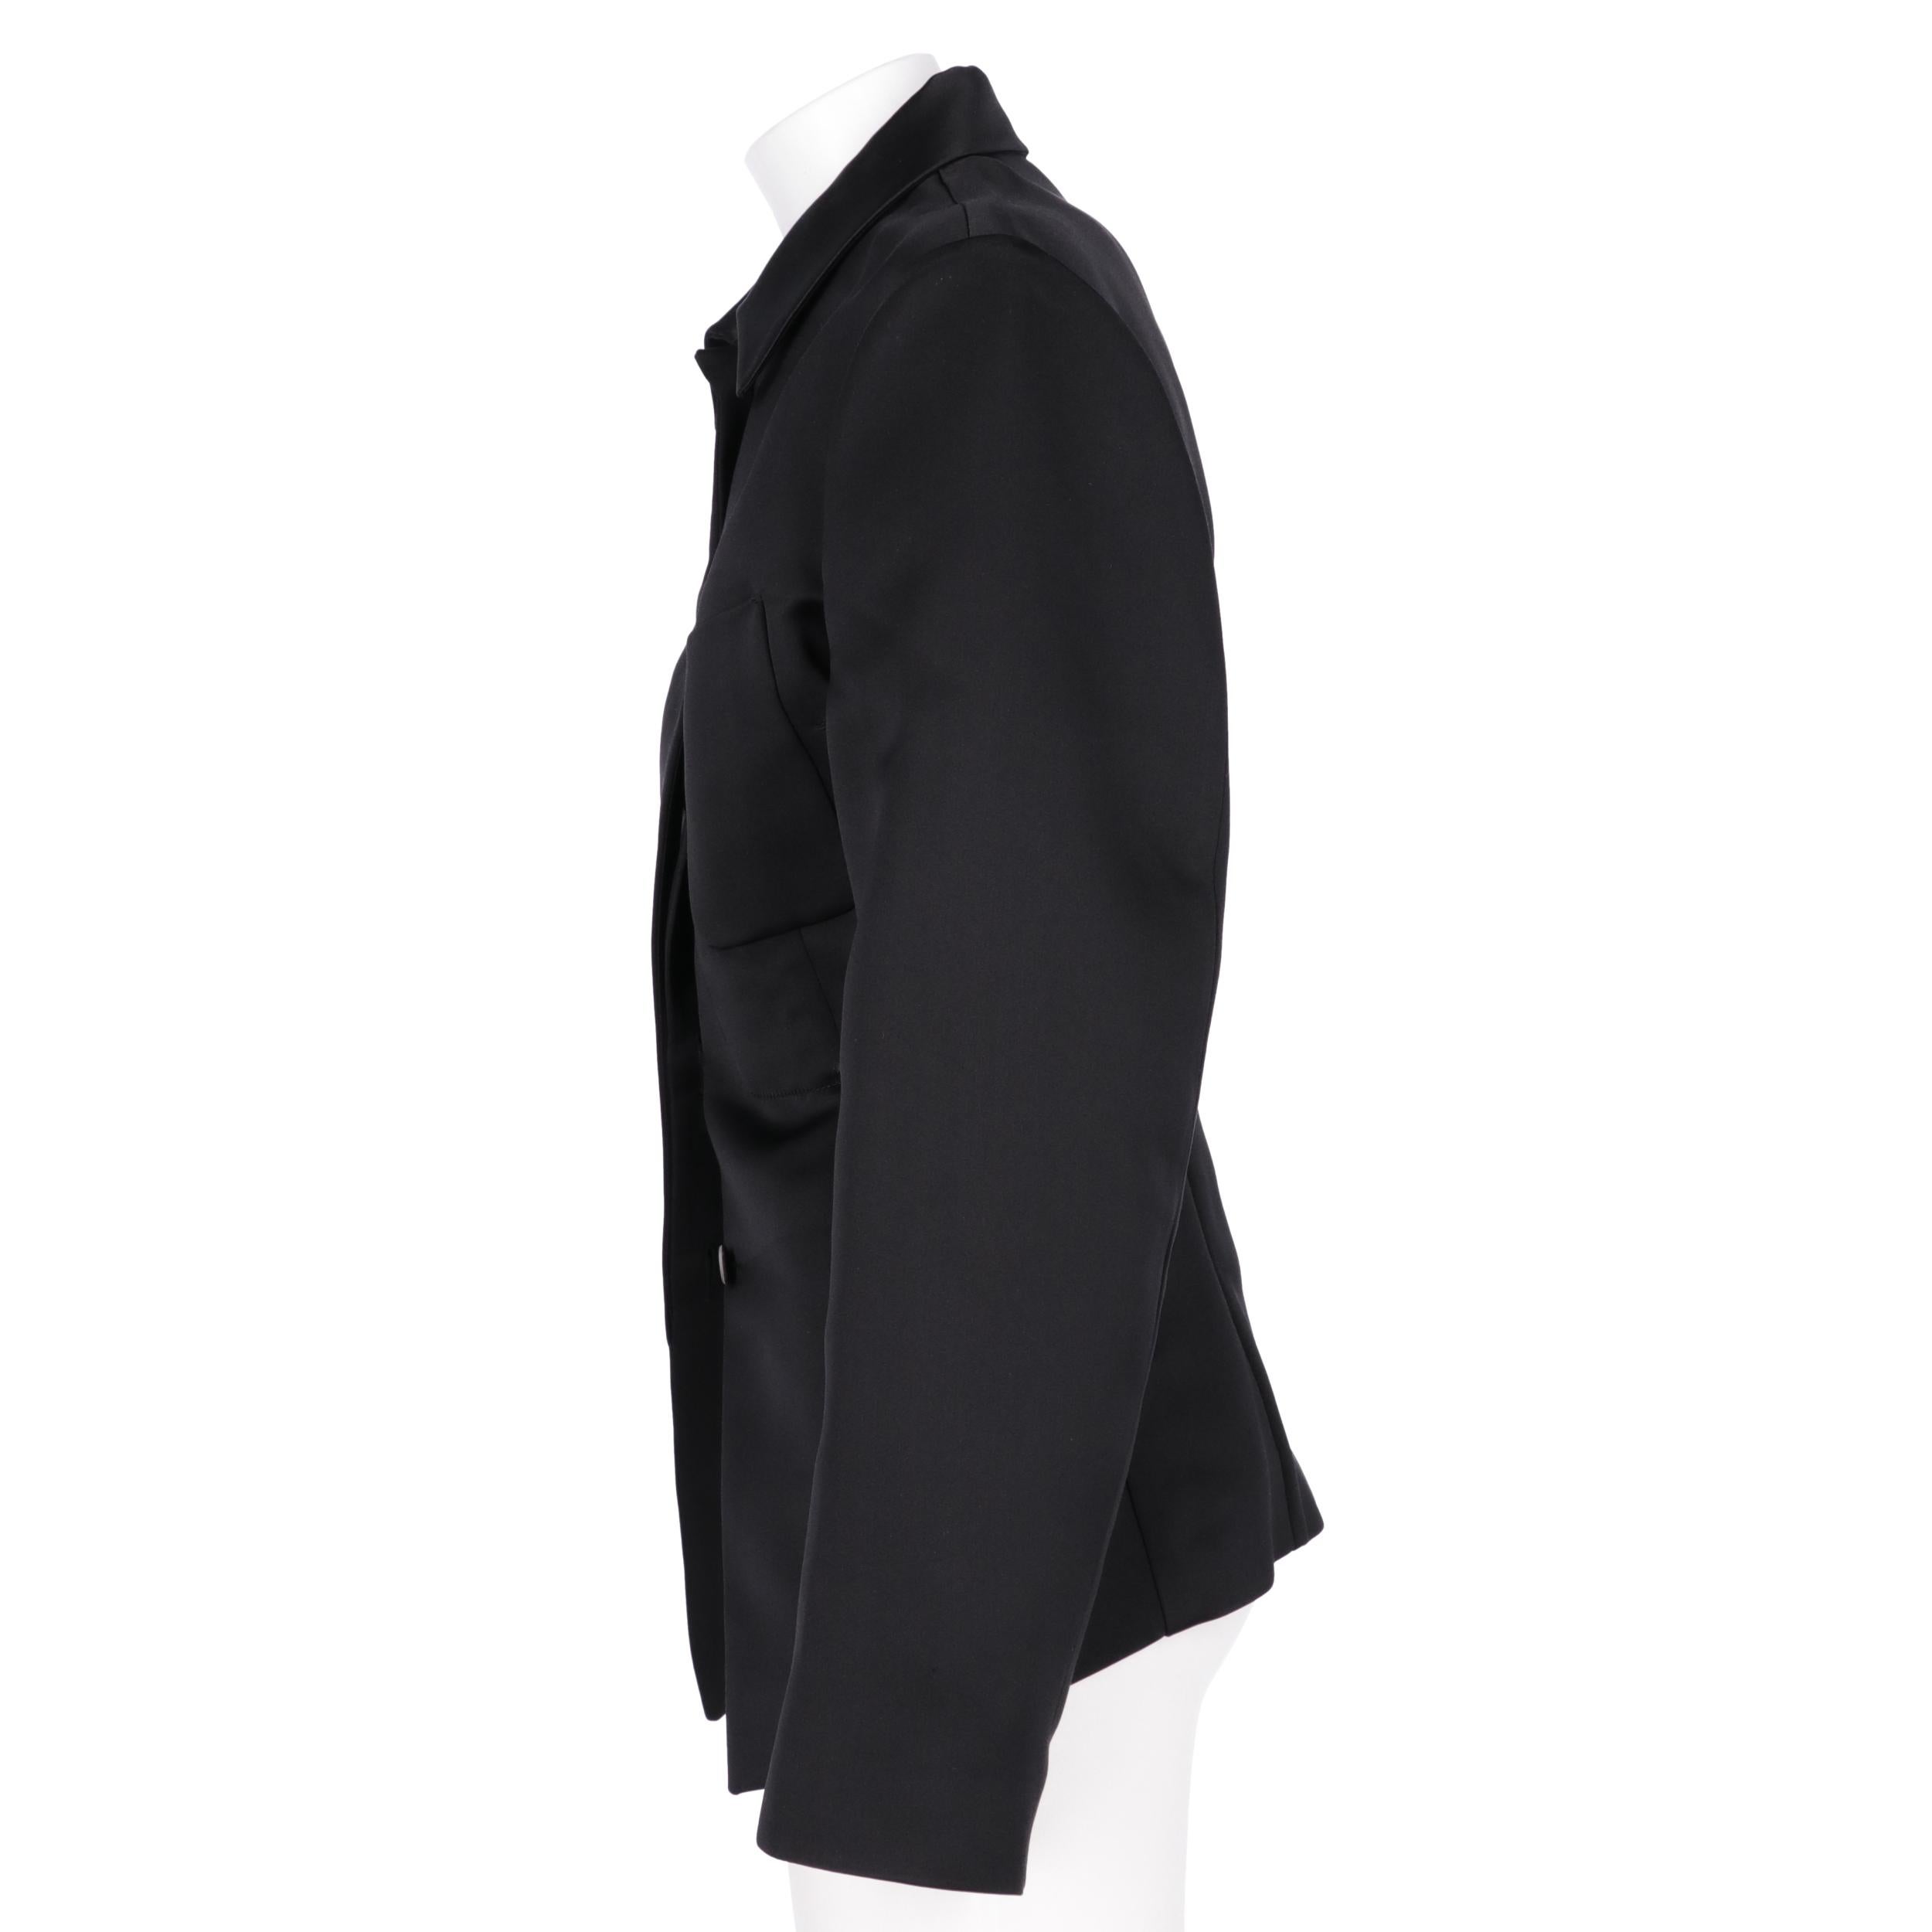 Jil Sander black slim-fit jacket. Classic collar, front English closure, long sleeves and patch pocket.
Years: 2014

Size: 34 EU

Flat measurements

Height: 72 cm
Bust: 48 cm
Shoulders: 38,5 cm
Sleeves: 64 cm